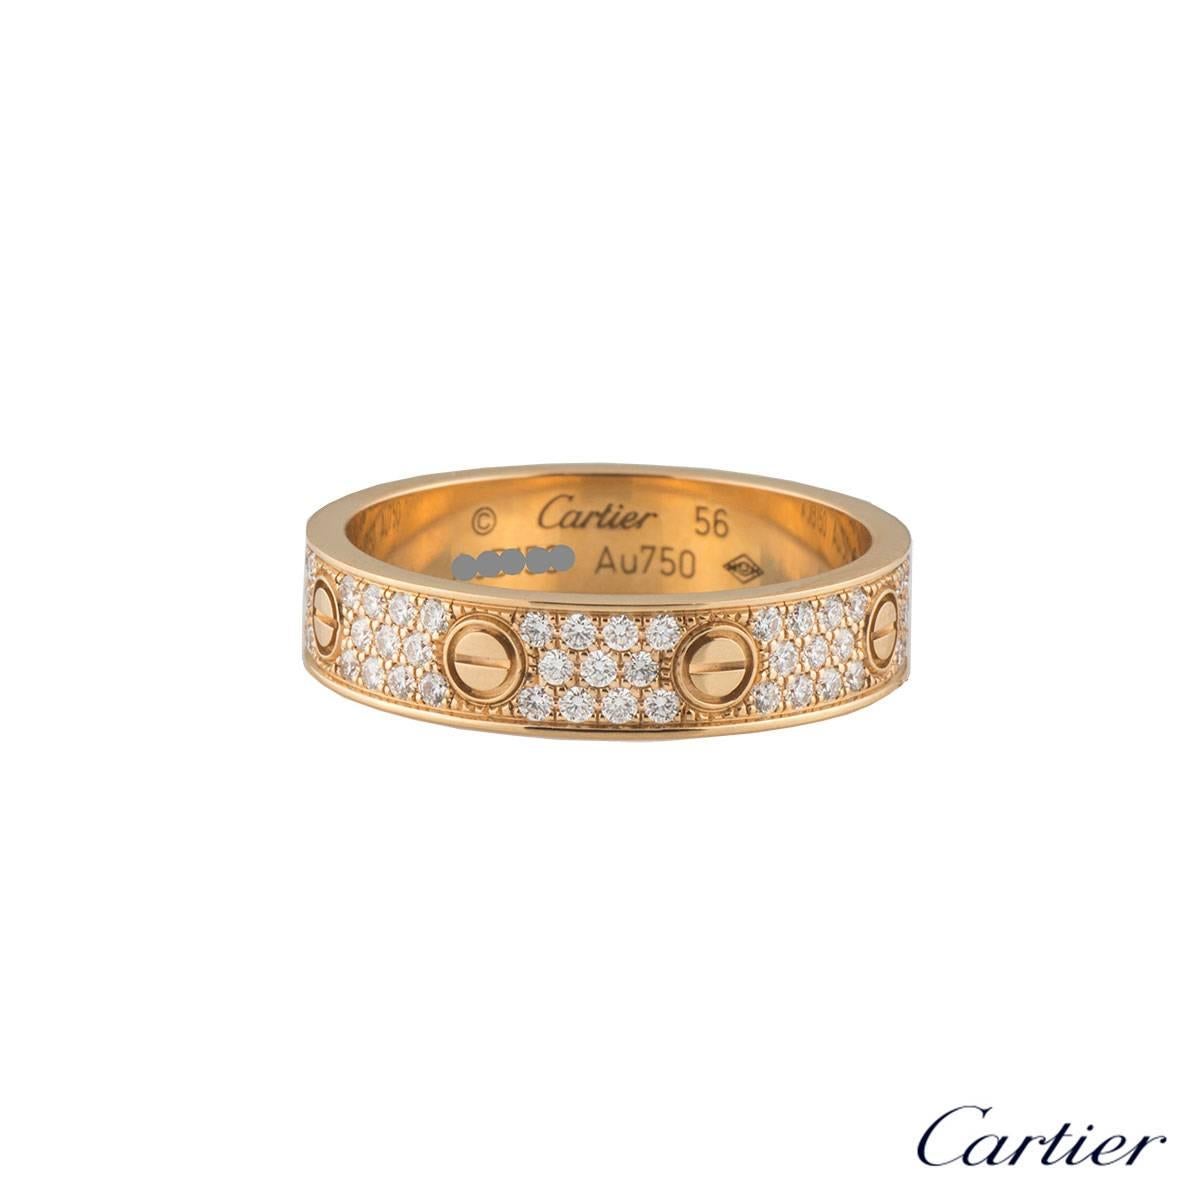 A 18k rose gold Cartier diamond pave ring from the Love collection. The ring comprises of the iconic screw motifs displayed around the outer edges with 88 round brilliant cut diamonds pave set between each screw motif. The total diamond weight is